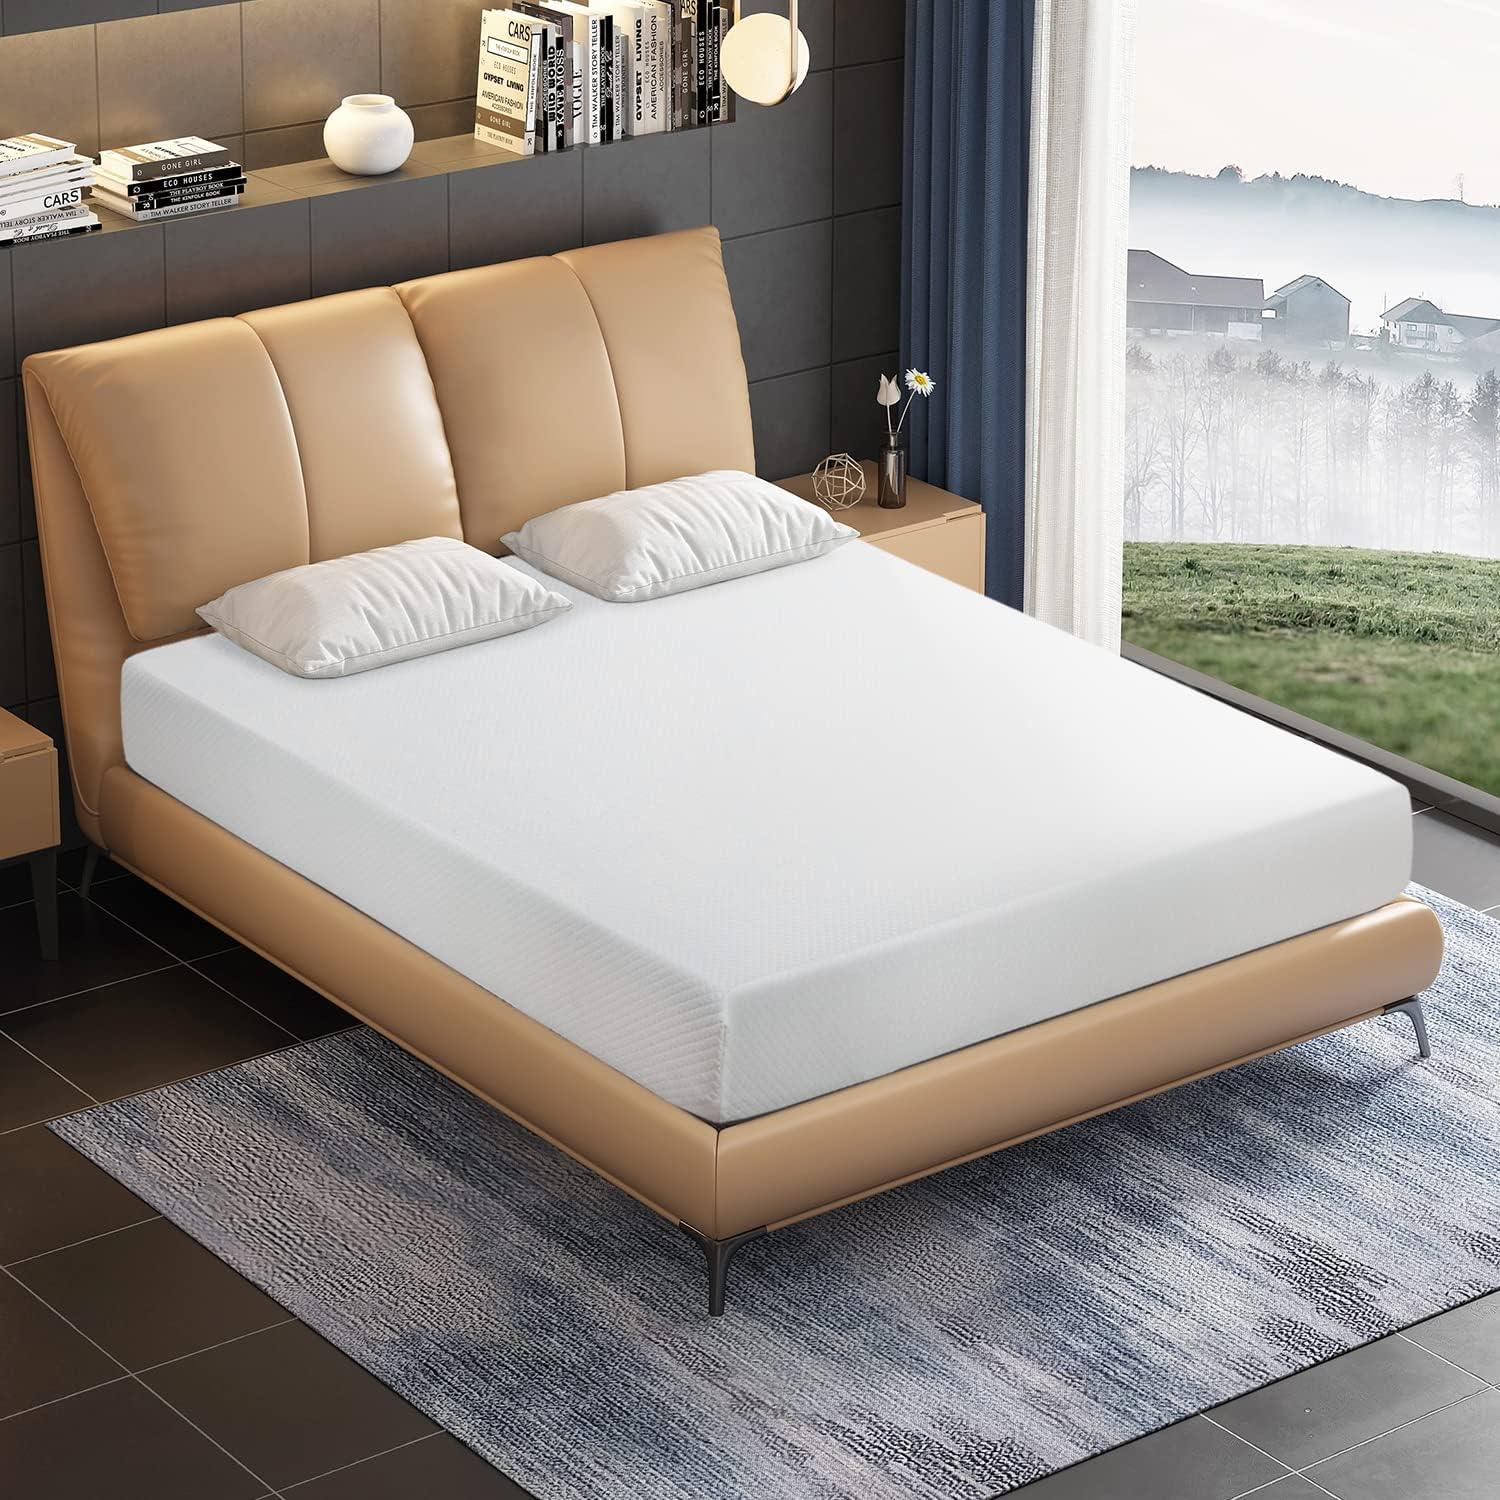 8-Inch Gel Memory Foam Mattress for Full Size Bed with Cool Sleep Pressure Relief - Furniture4Design